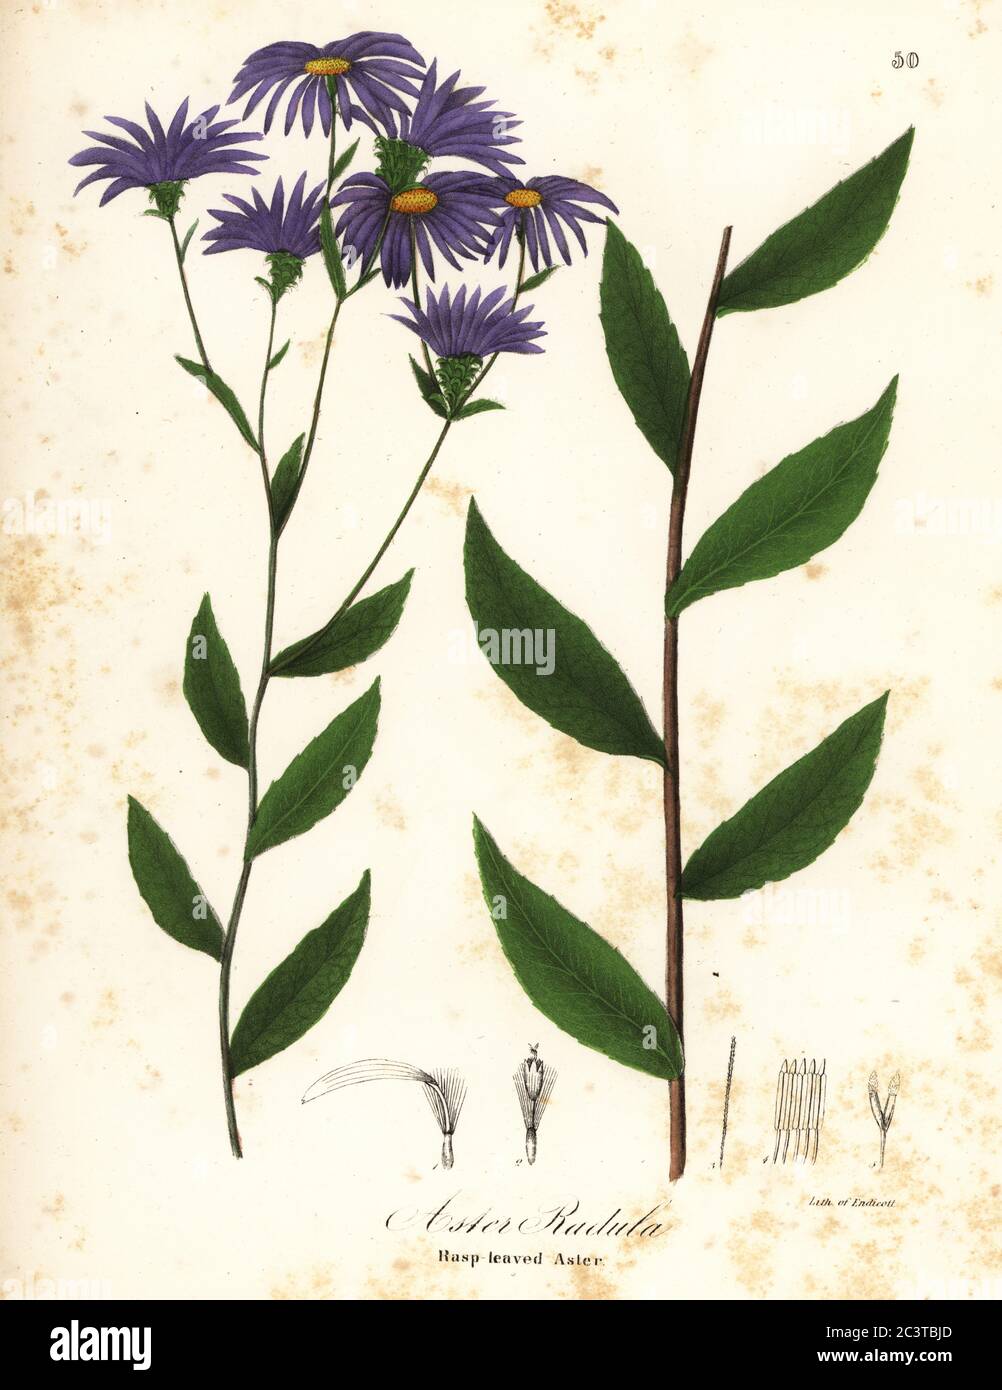 Low rough aster or rough wood aster, Eurybia radula (Rasp-leaved aster, Aster radula). Handcoloured lithograph by Endicott after a botanical illustration from John Torrey’s A Flora of the State of New York, Carroll and Cook, Albany, 1843. The plates drawn by John Torrey, Agnes Mitchell, Elizabeth Paoley and Swinton. John Torrey was an American botanist, chemist and physician 1796-1873. Stock Photo